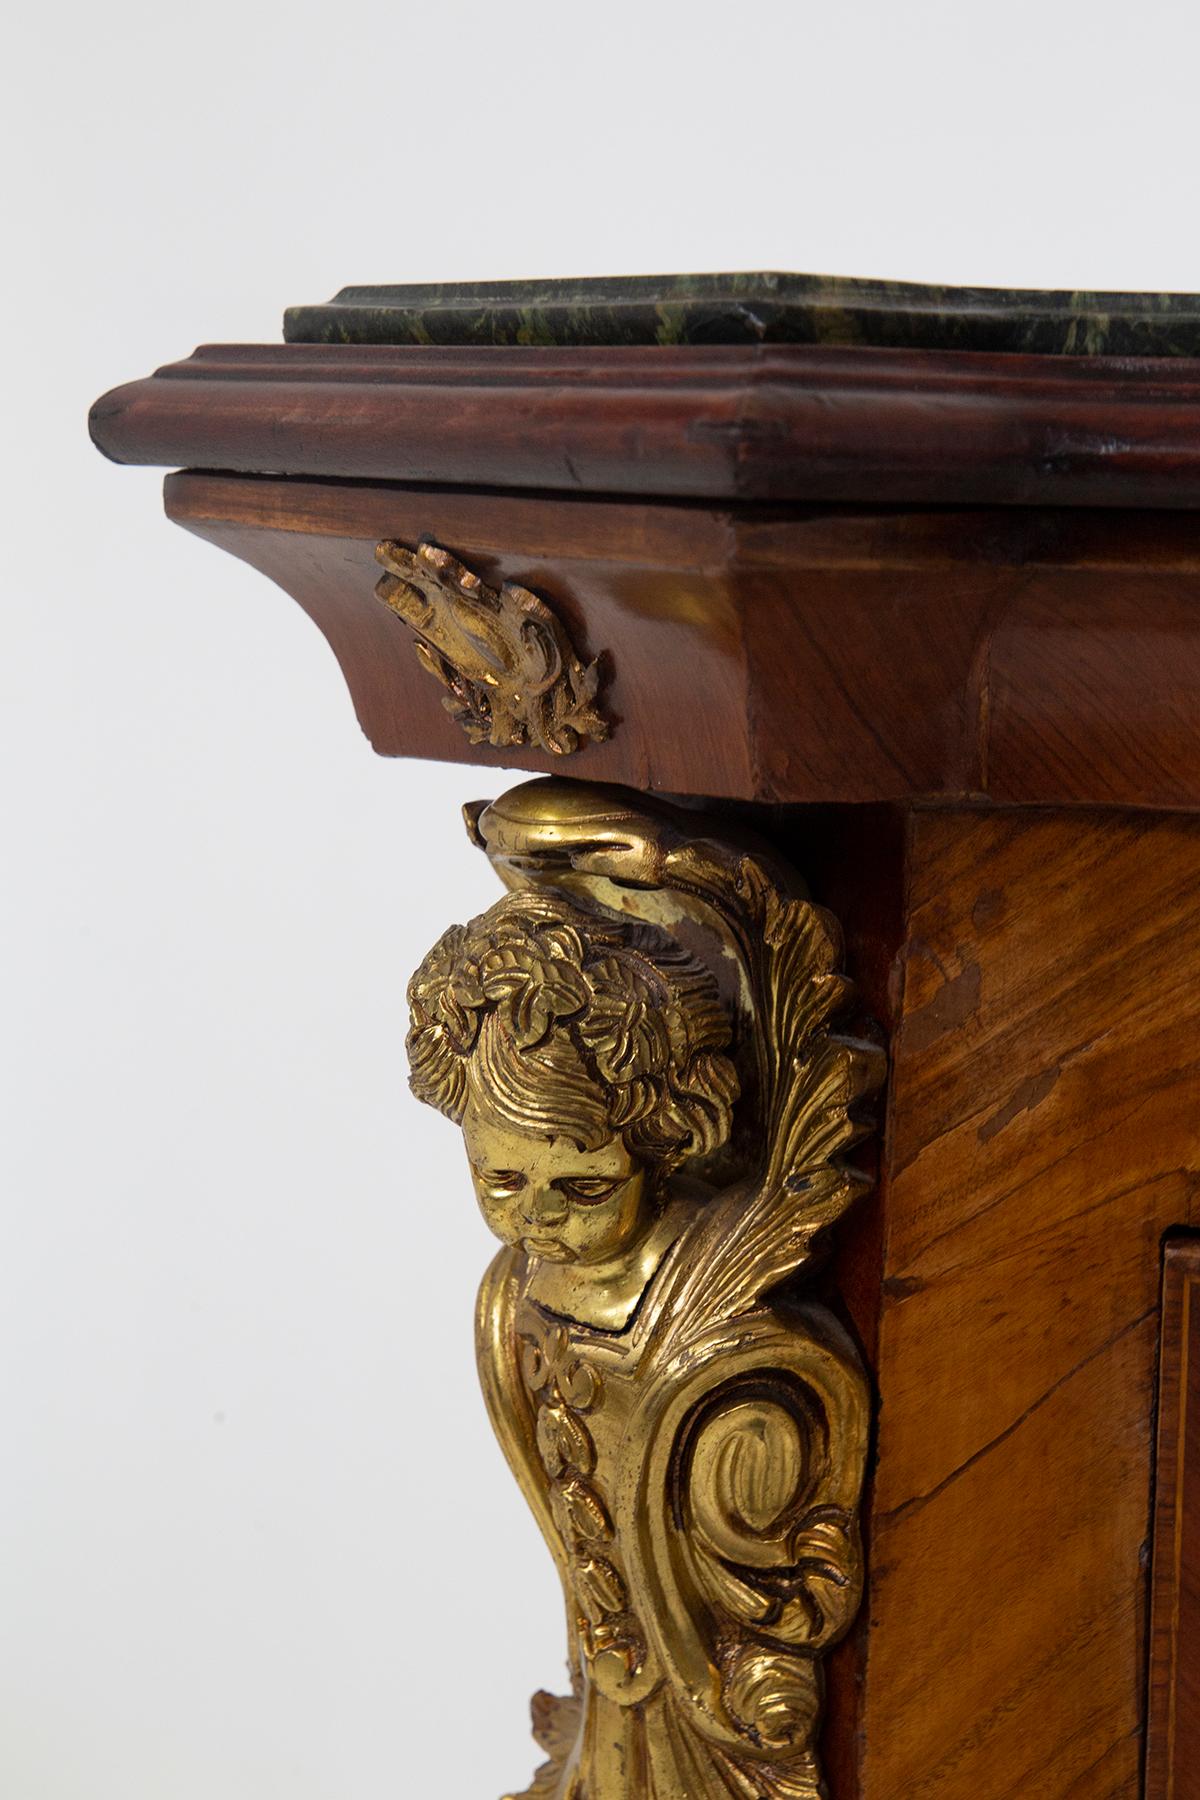 Gilt A French Louis XVI-style gilt bronze mounted wooden pedestal For Sale